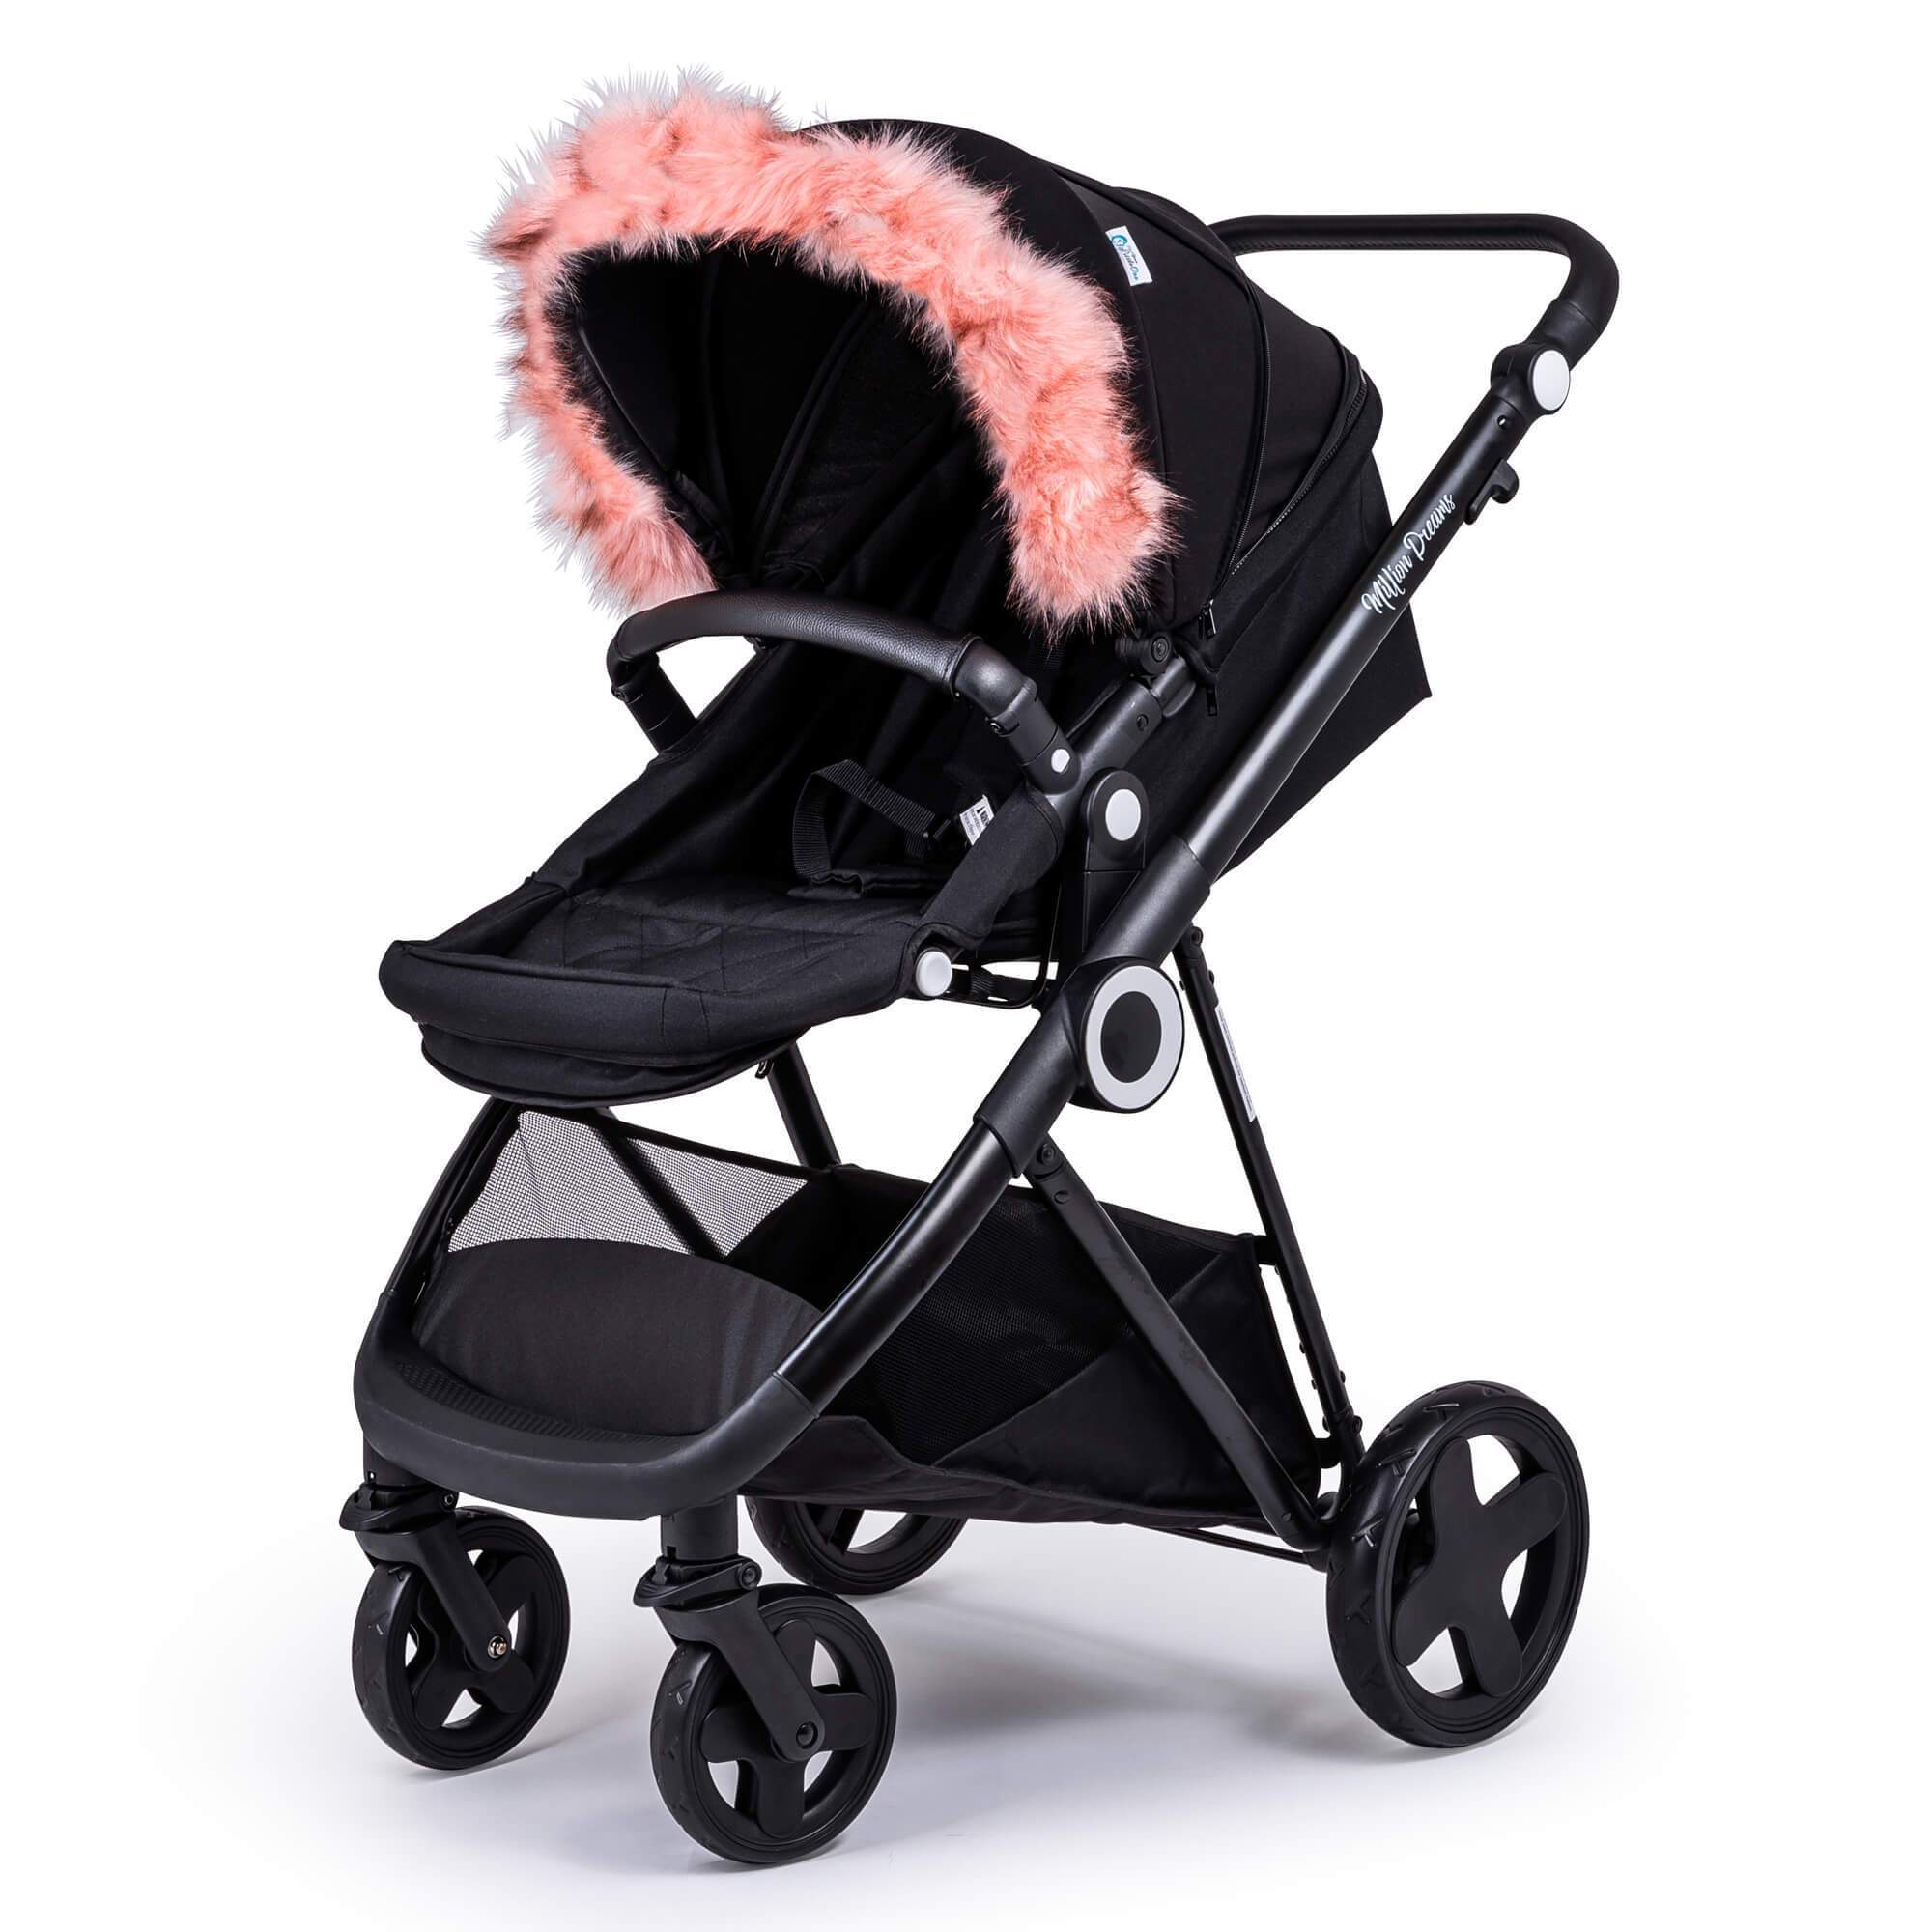 Pram Fur Hood Trim Attachment for Pushchair Compatible with Little Shield - Pink / Fits All Models | For Your Little One